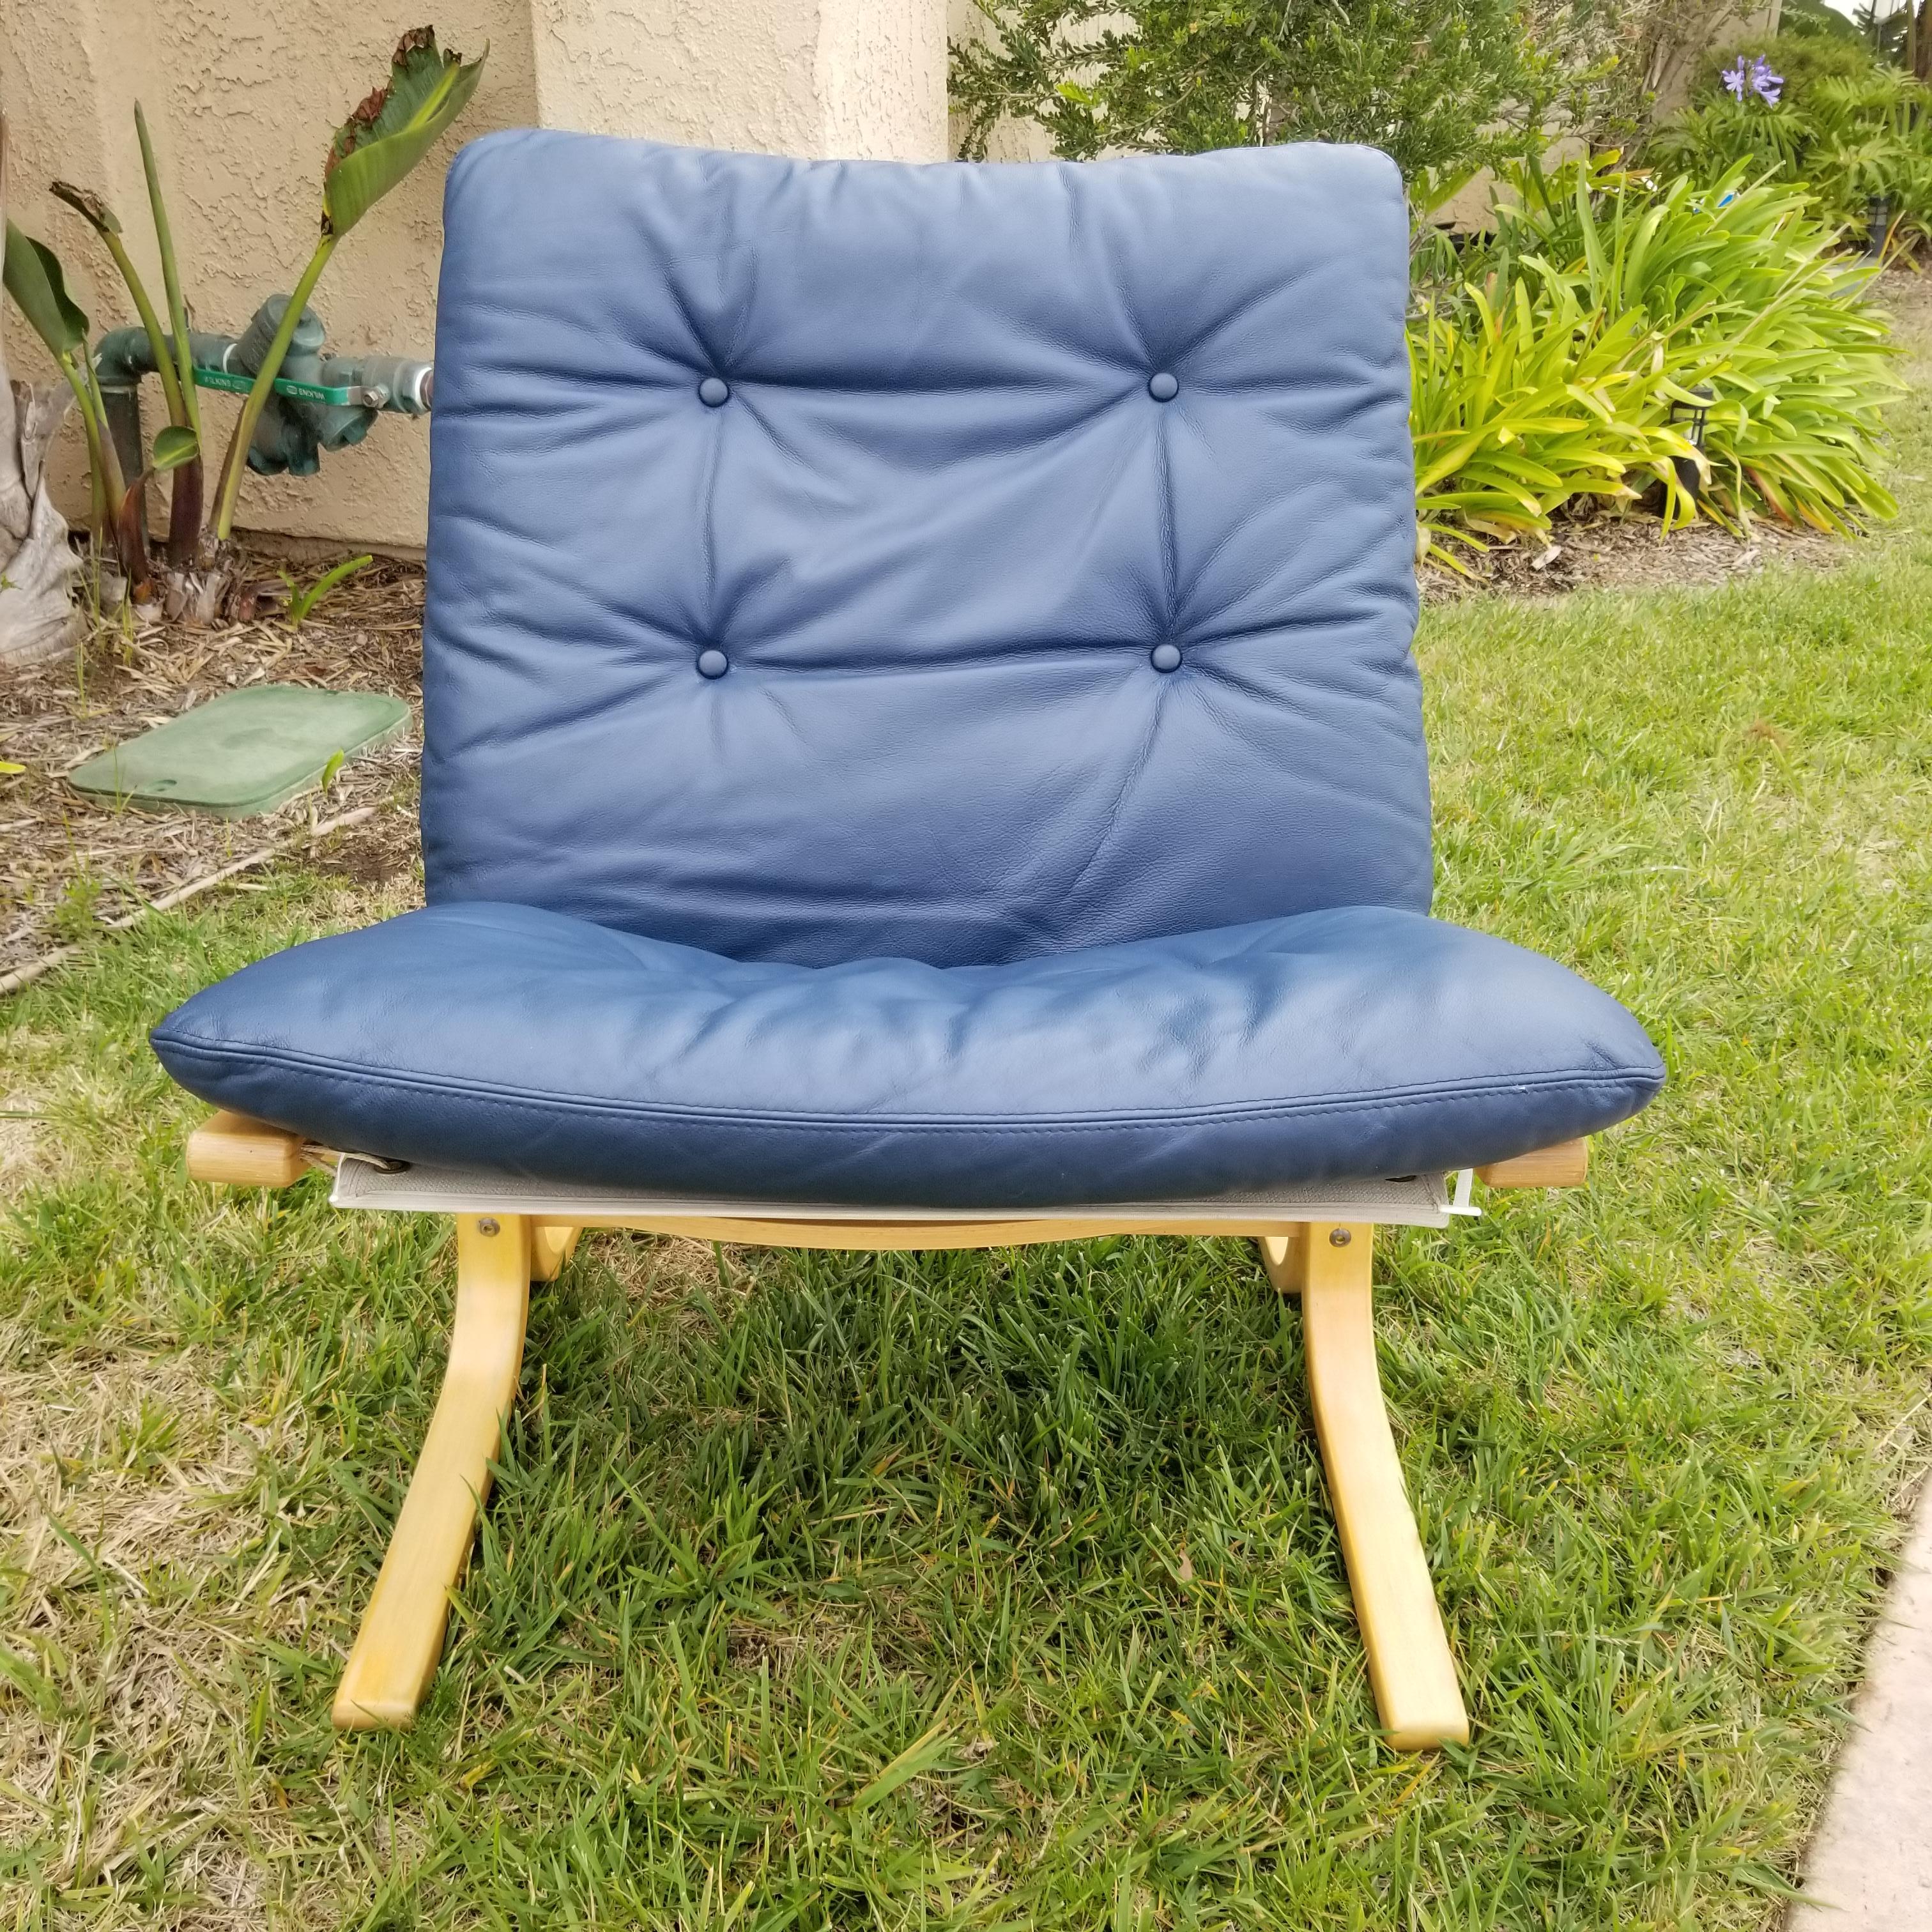 Lounge Chair
Sleek Siesta Lounge Chair Modern Bentwood and Leather 
Original Classic Siesta Lounge Chair in Navy Leather from Norway 1960s
Designed by Ingmar Relling and manufactured by Westnofa 
30.5H x 34D x 24W inches Seat H 17
Preowned